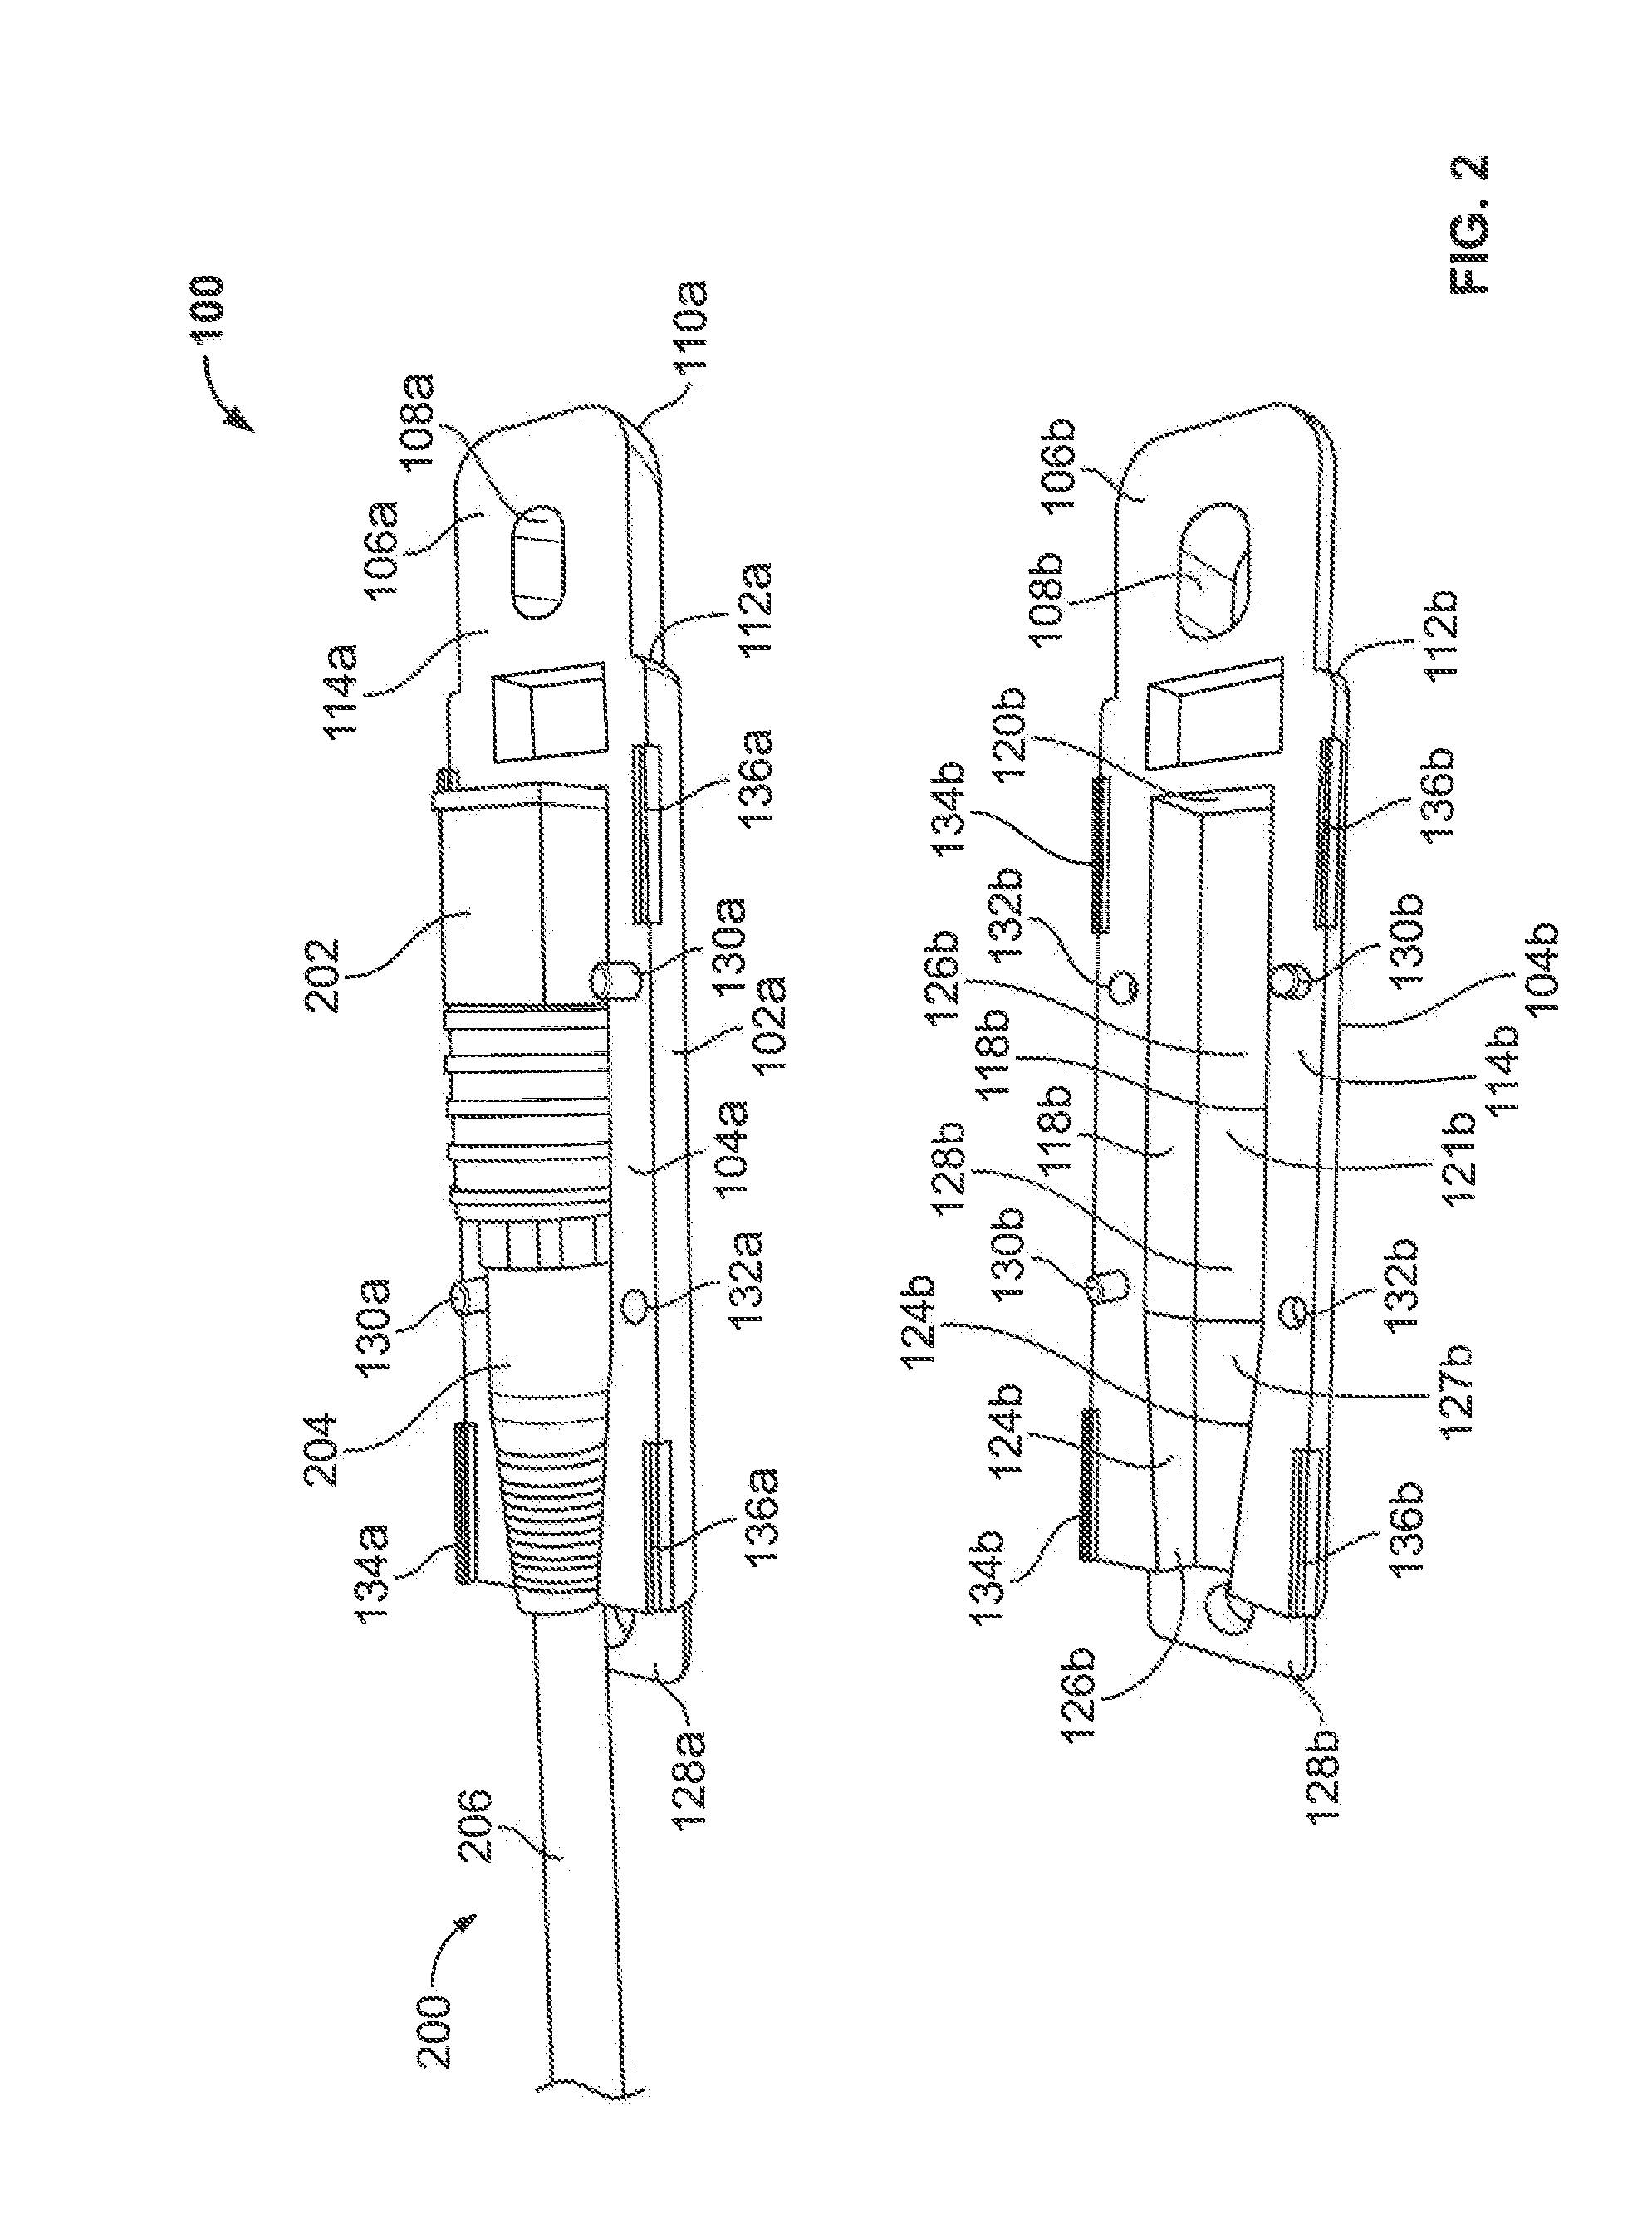 Cable Carrier Device